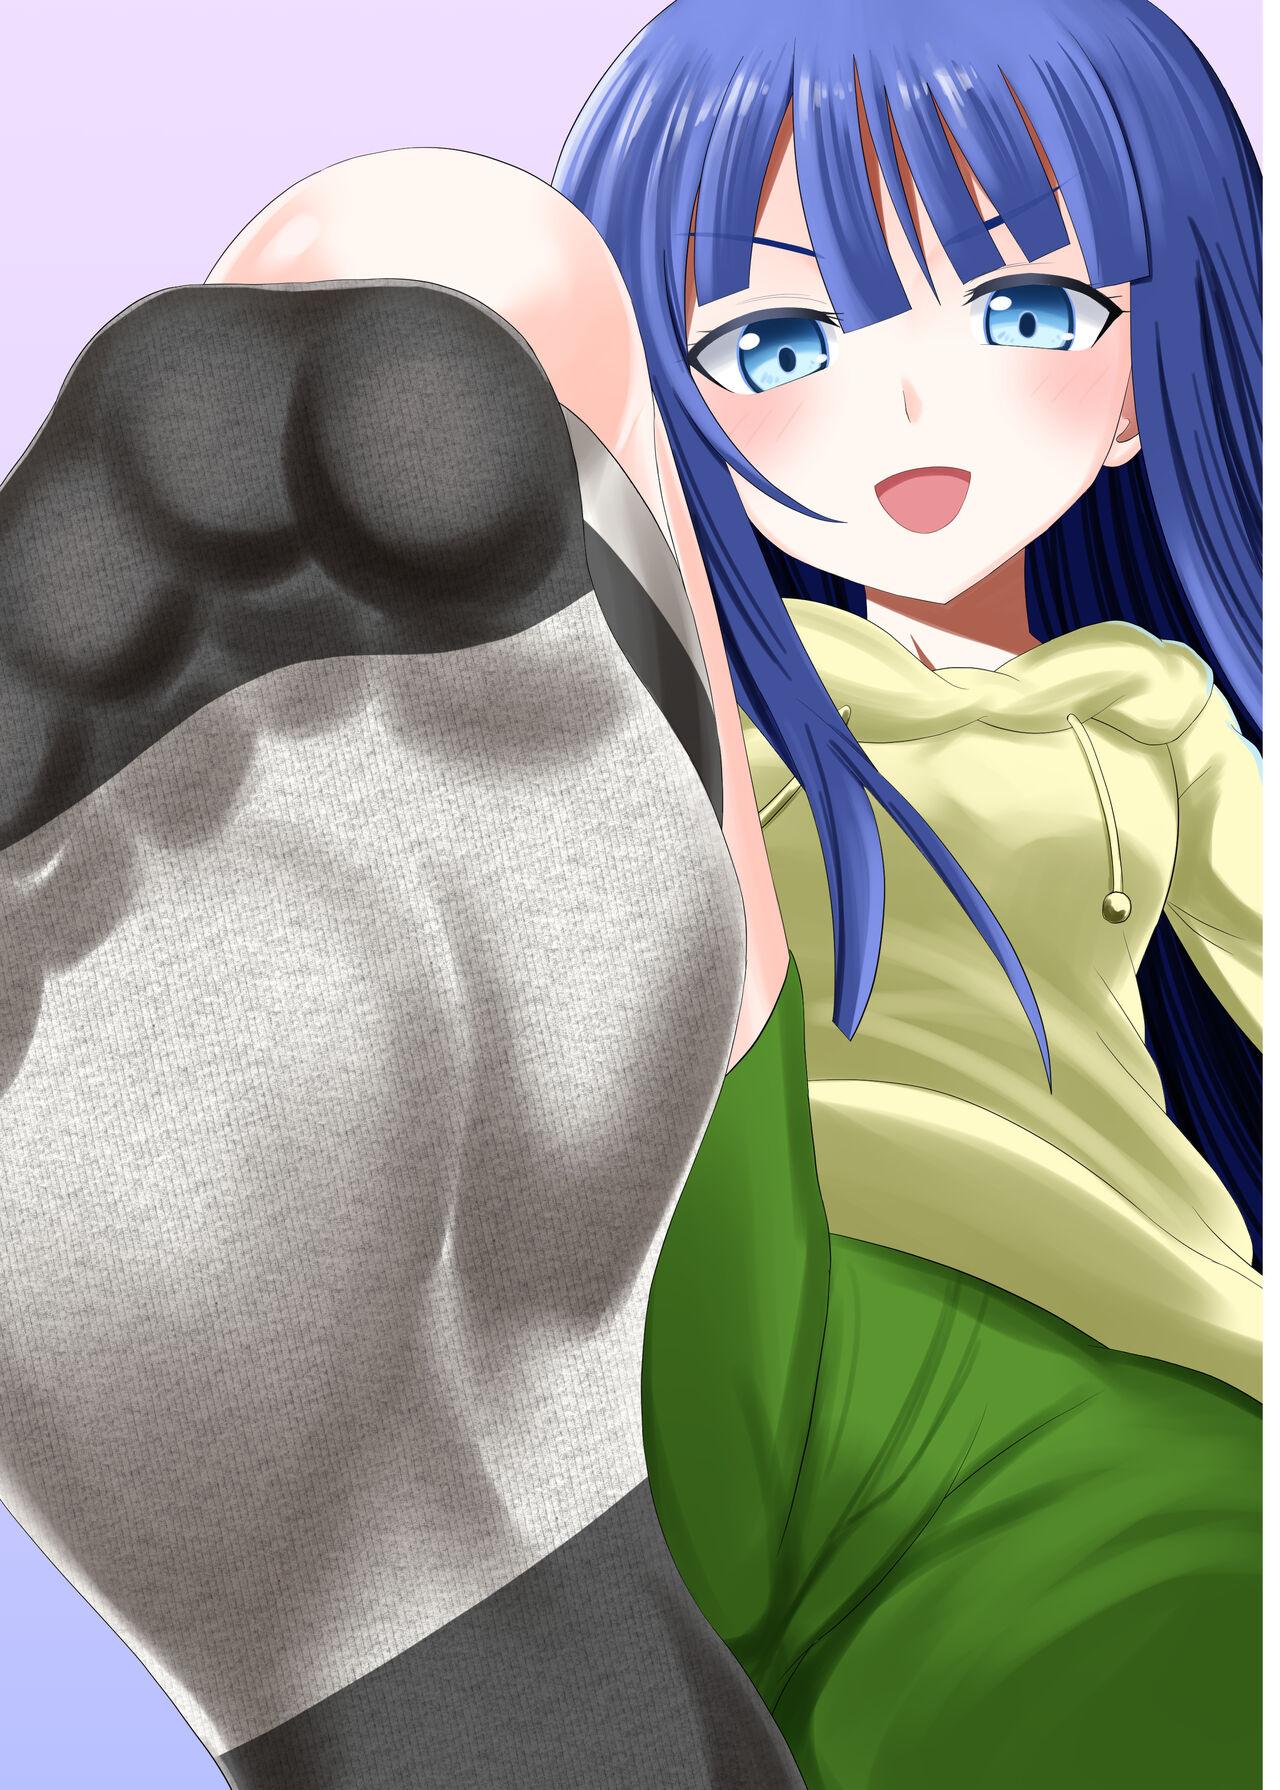 Crushed under socked foot 33